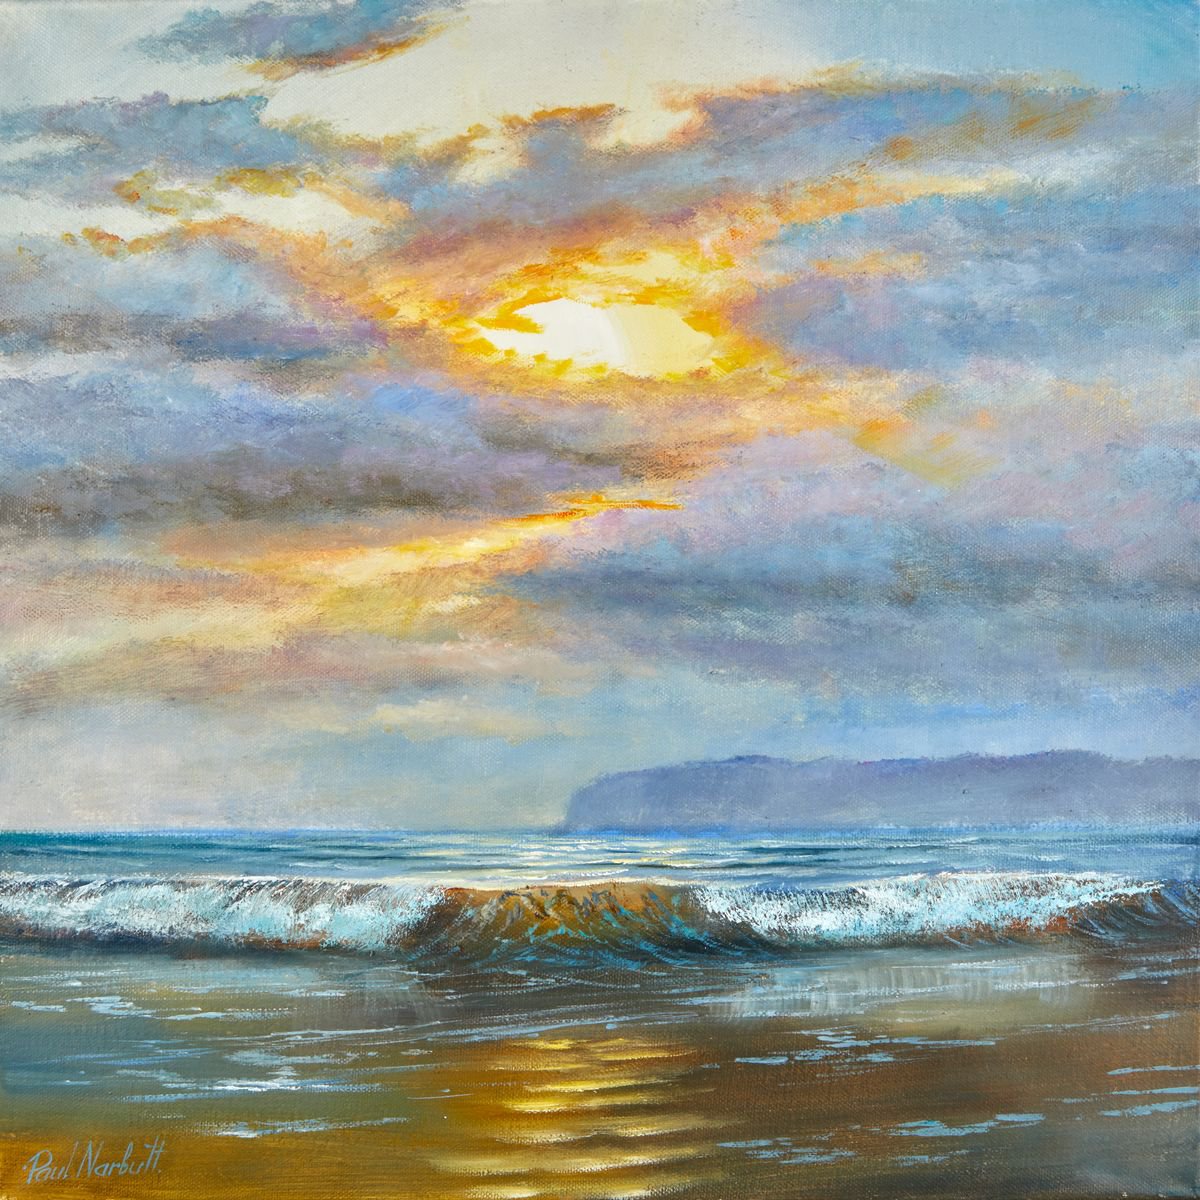 The Sun Behind the Clouds II by Paul Narbutt